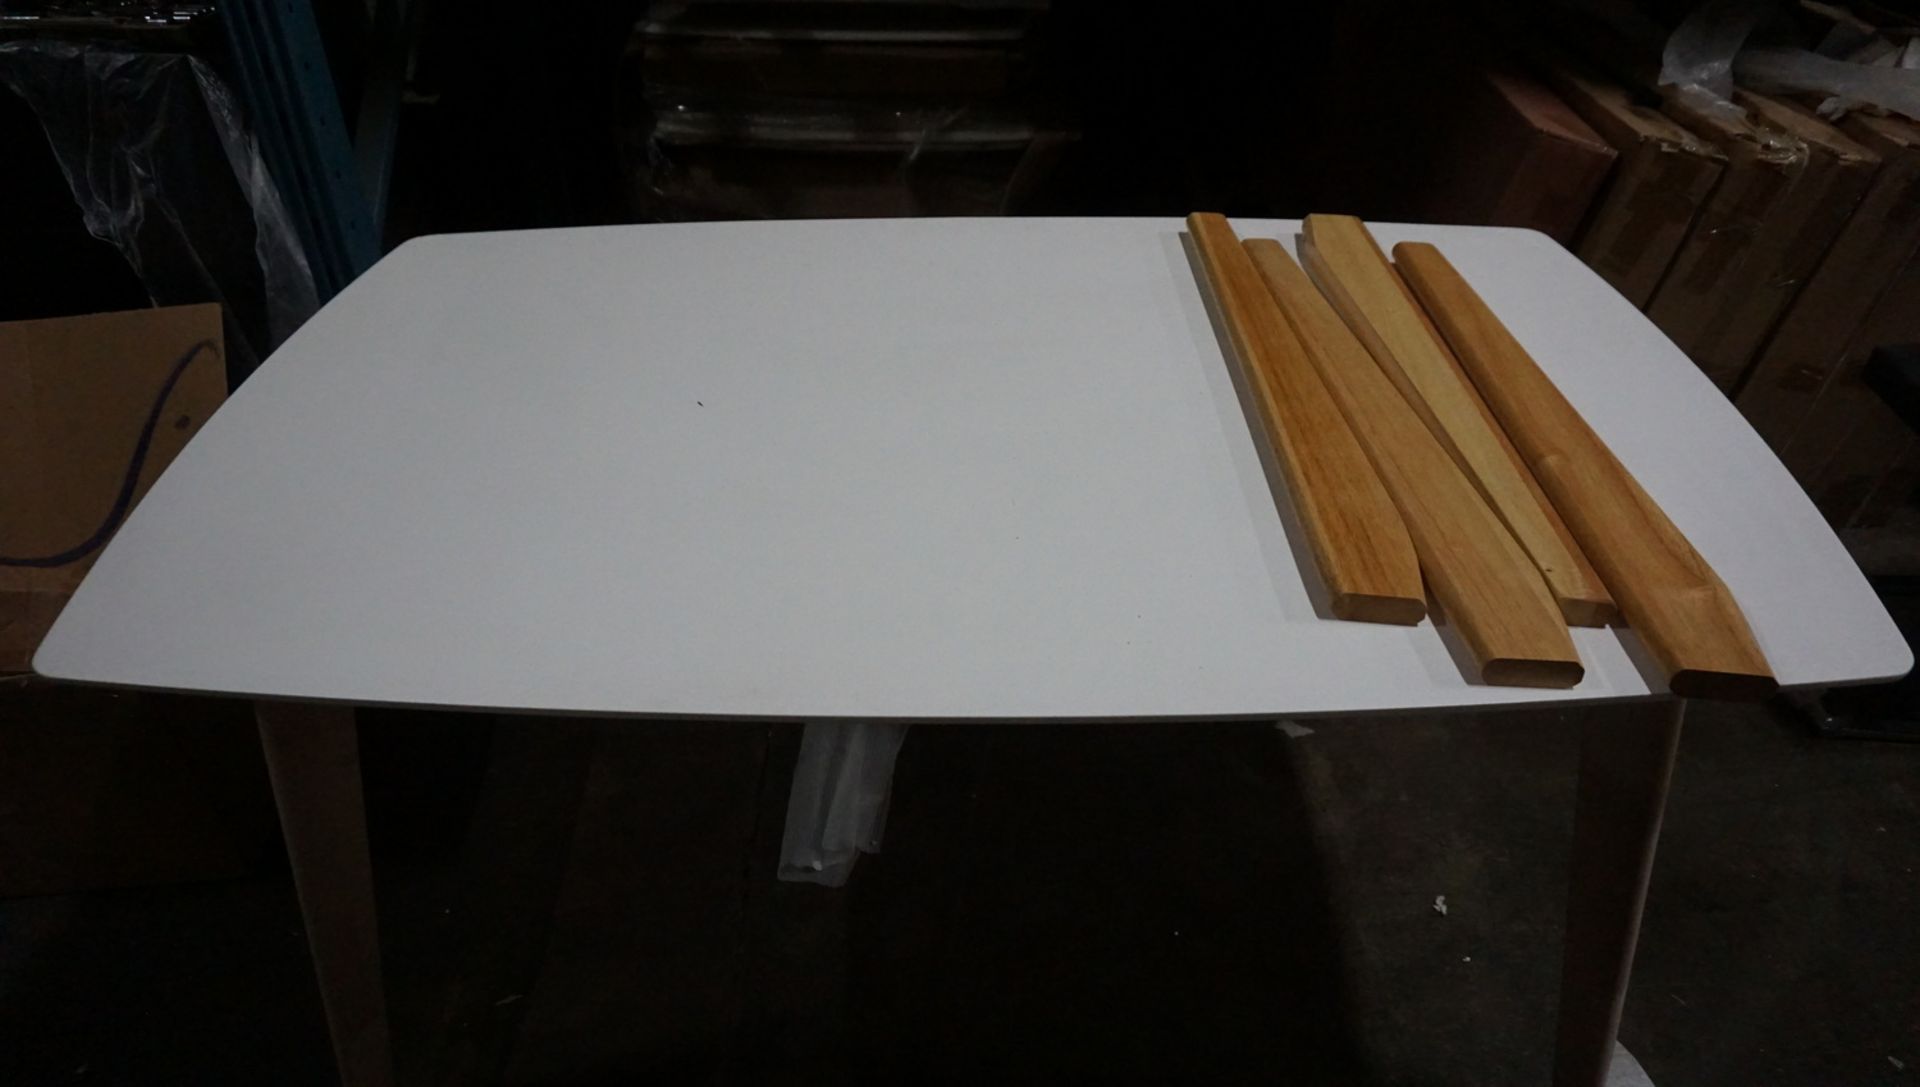 WHITE 59" X 39.5" X 29.5"H DINING TABLE W/ NATURAL WOOD LEGS